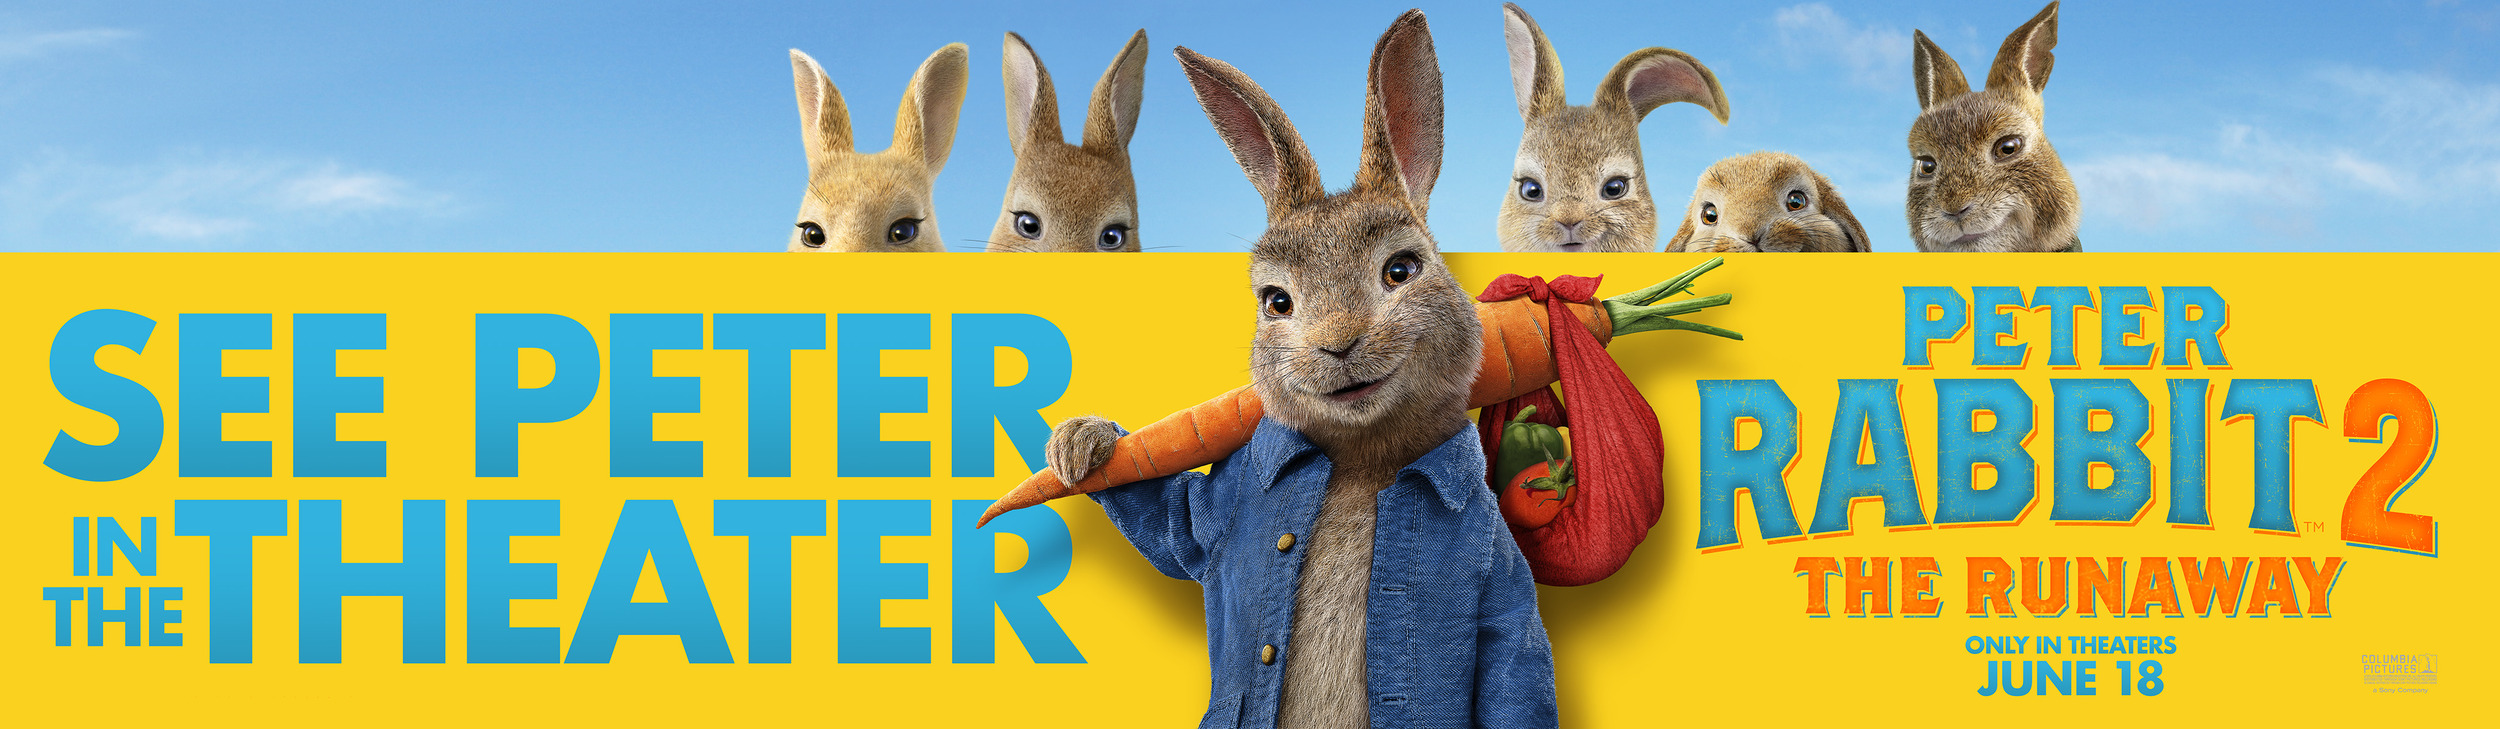 Mega Sized Movie Poster Image for Peter Rabbit 2 (#18 of 20)